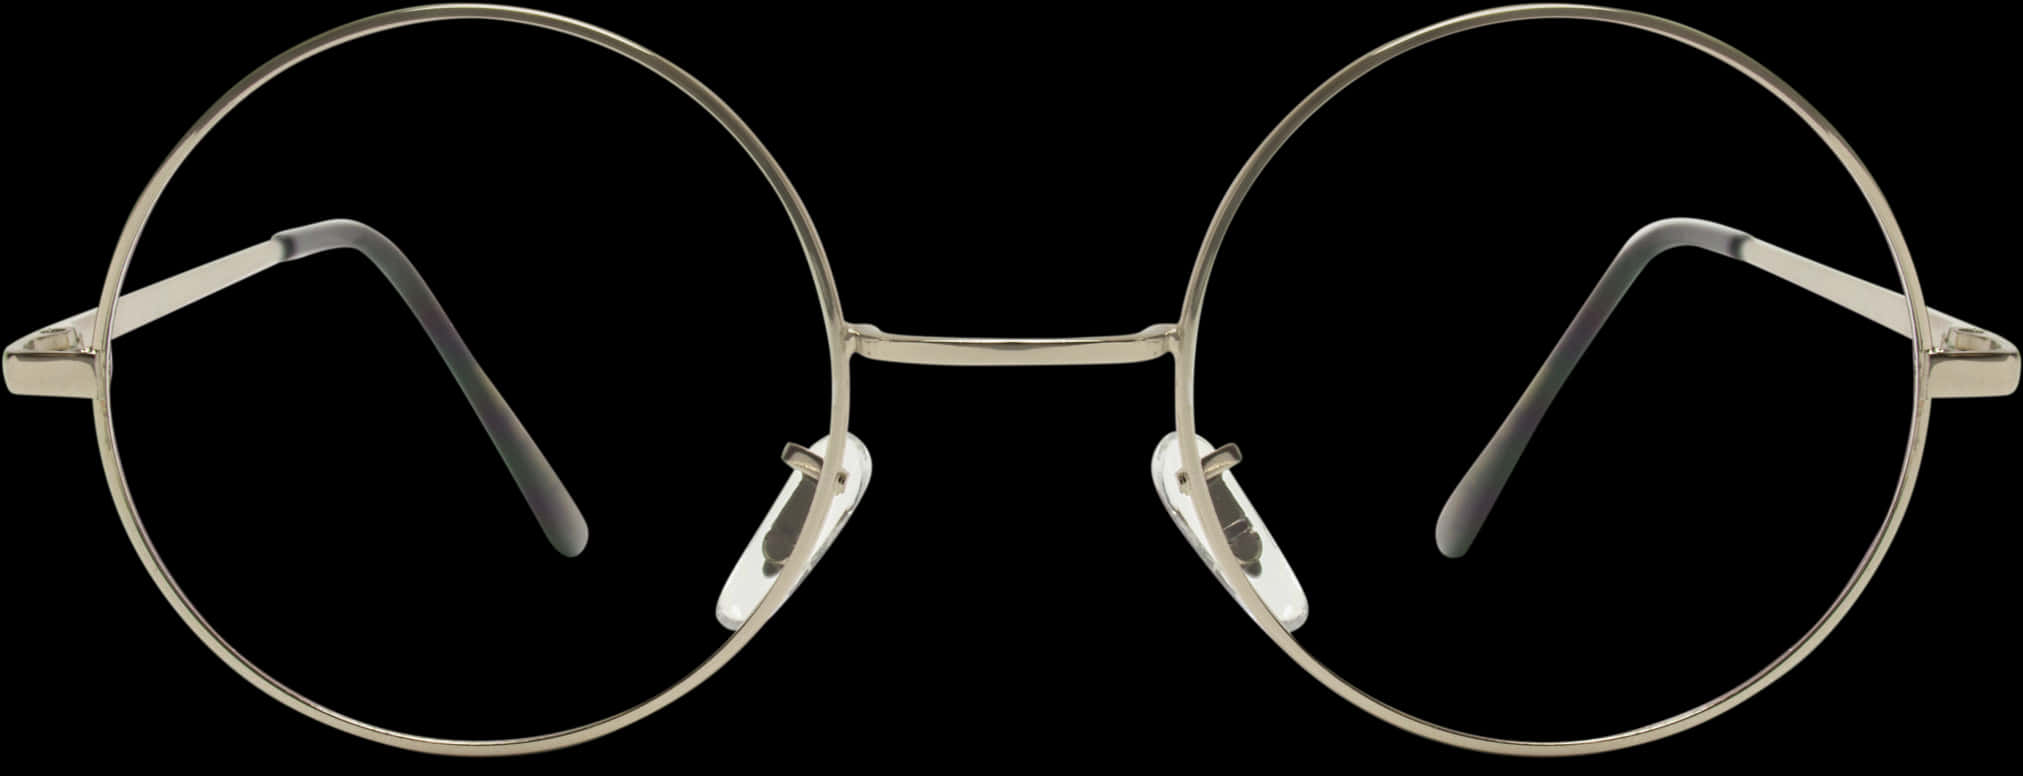 Round Metal Eyeglasses Isolated PNG